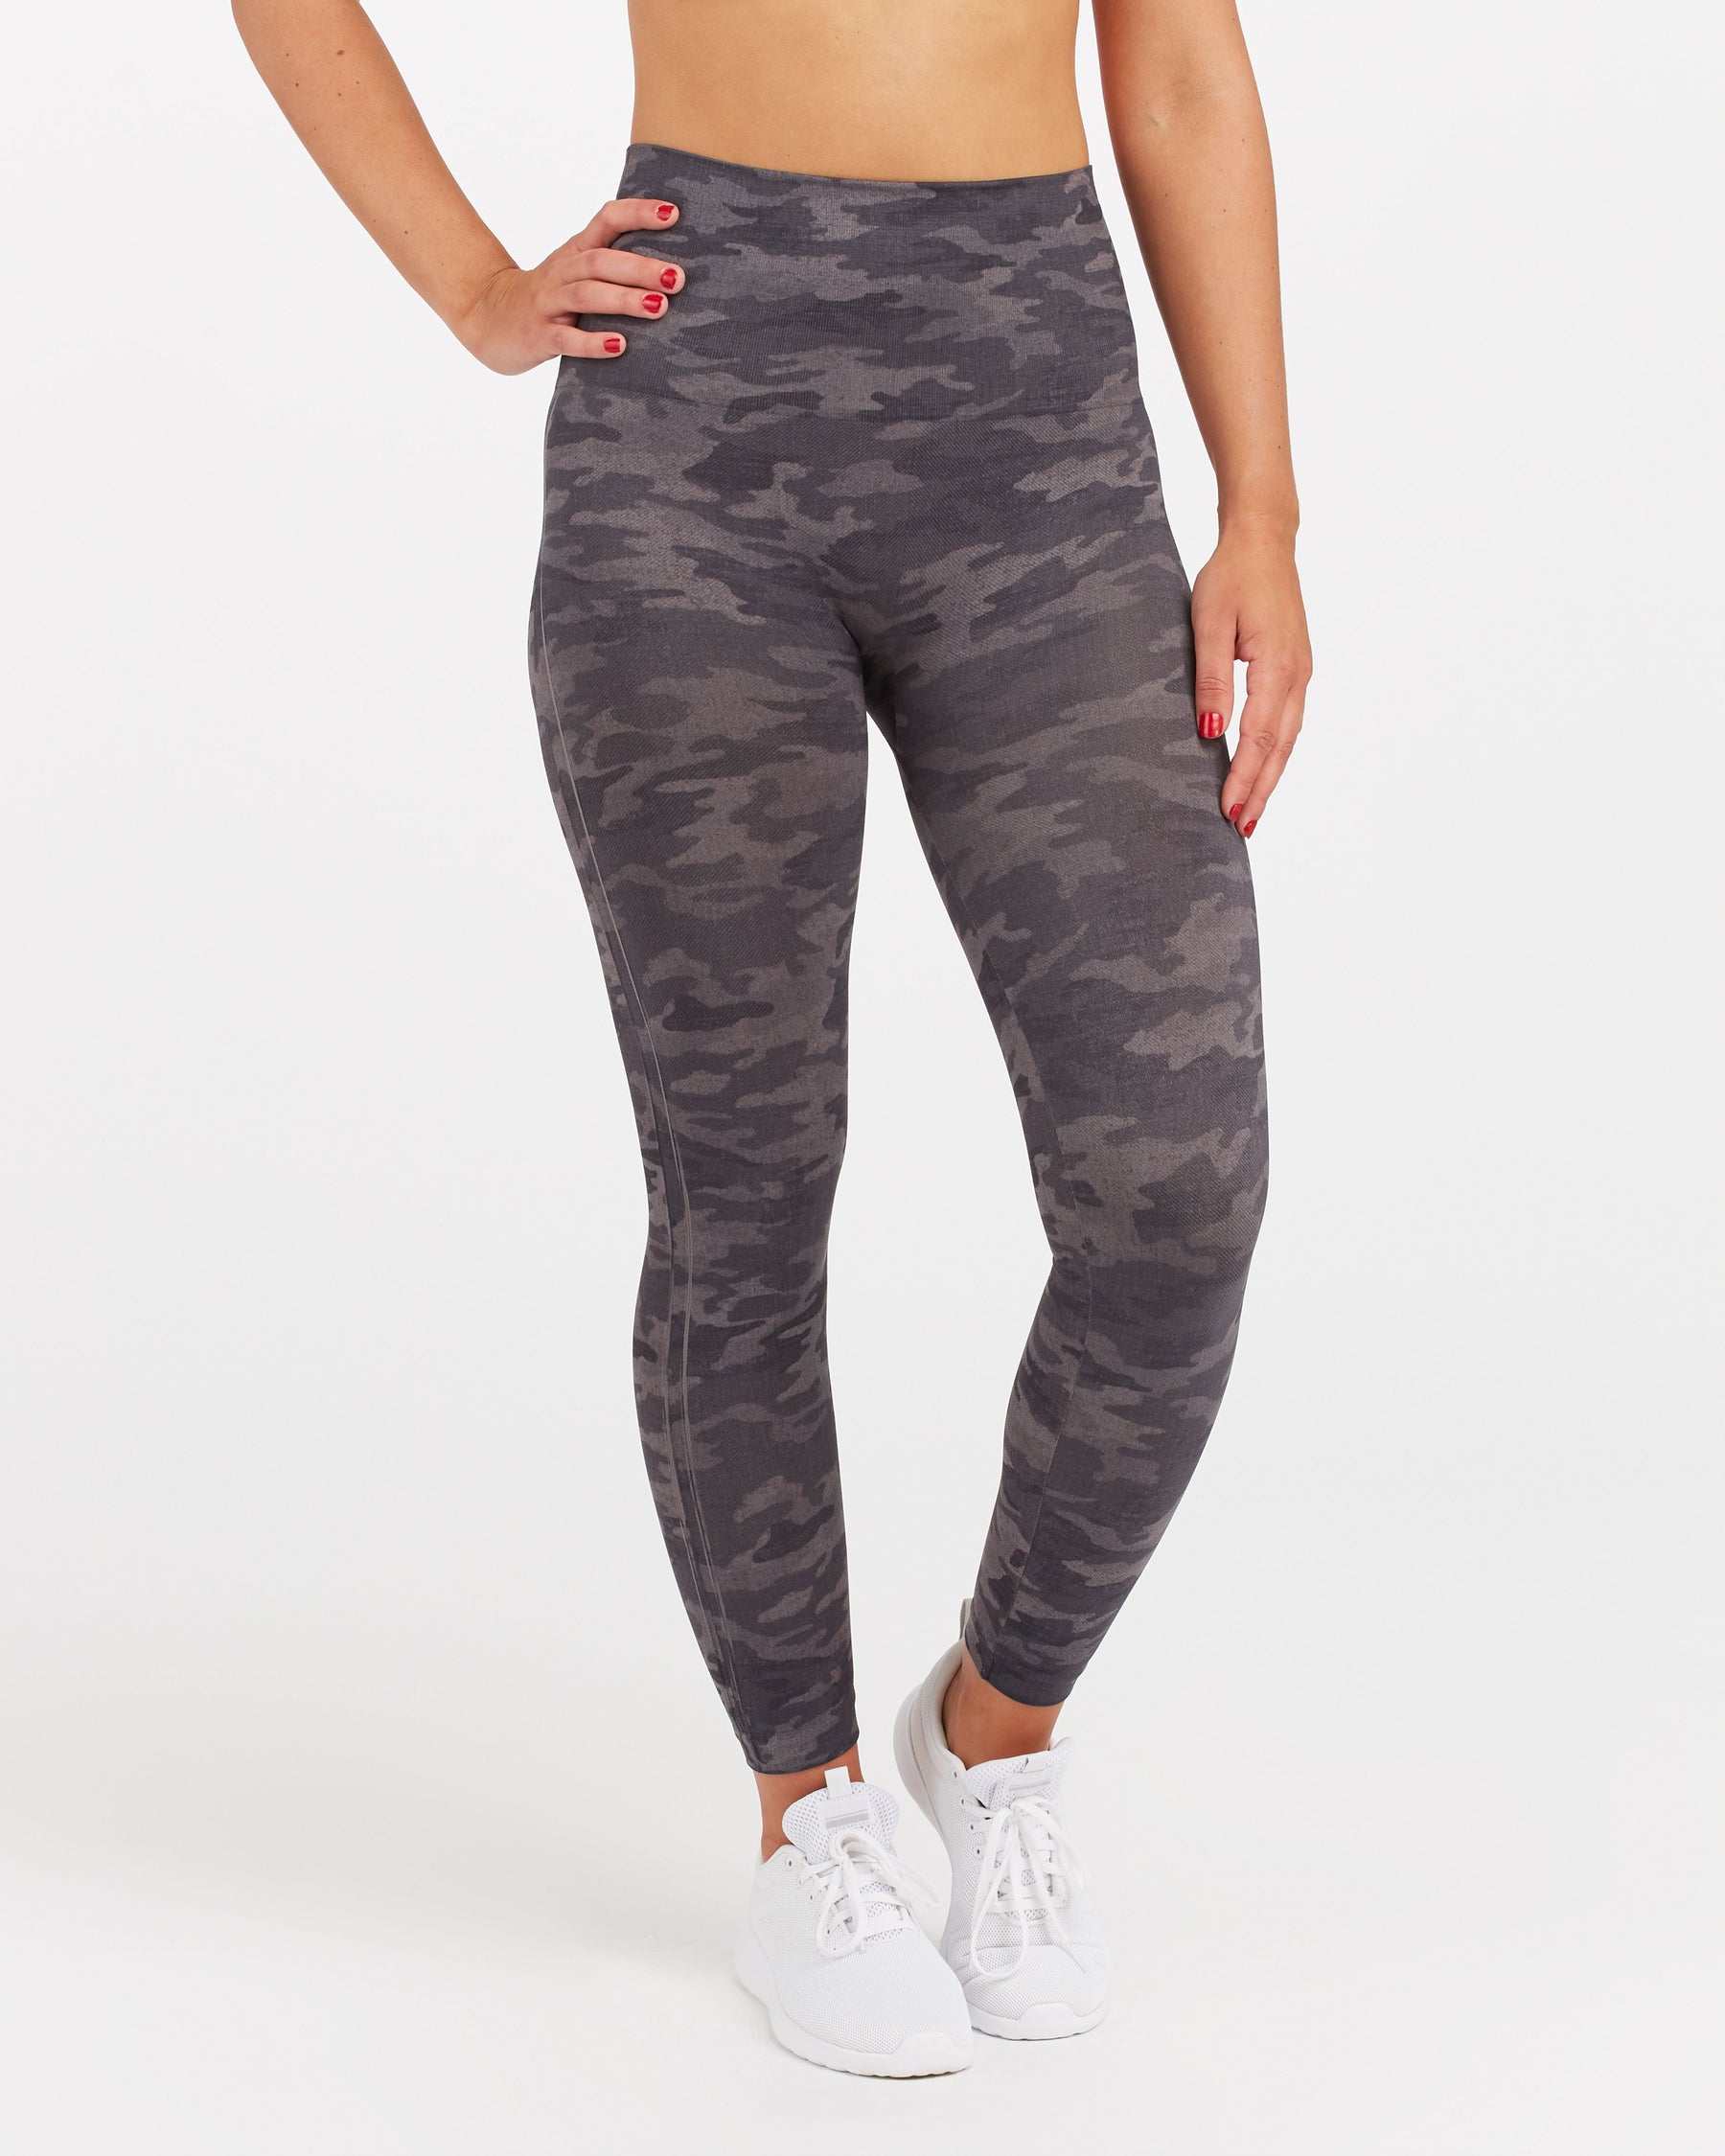 Buy YEOREO Women Seamless Camo Leggings High Waisted Gym Yoga Pants Blue L  at Amazon.in